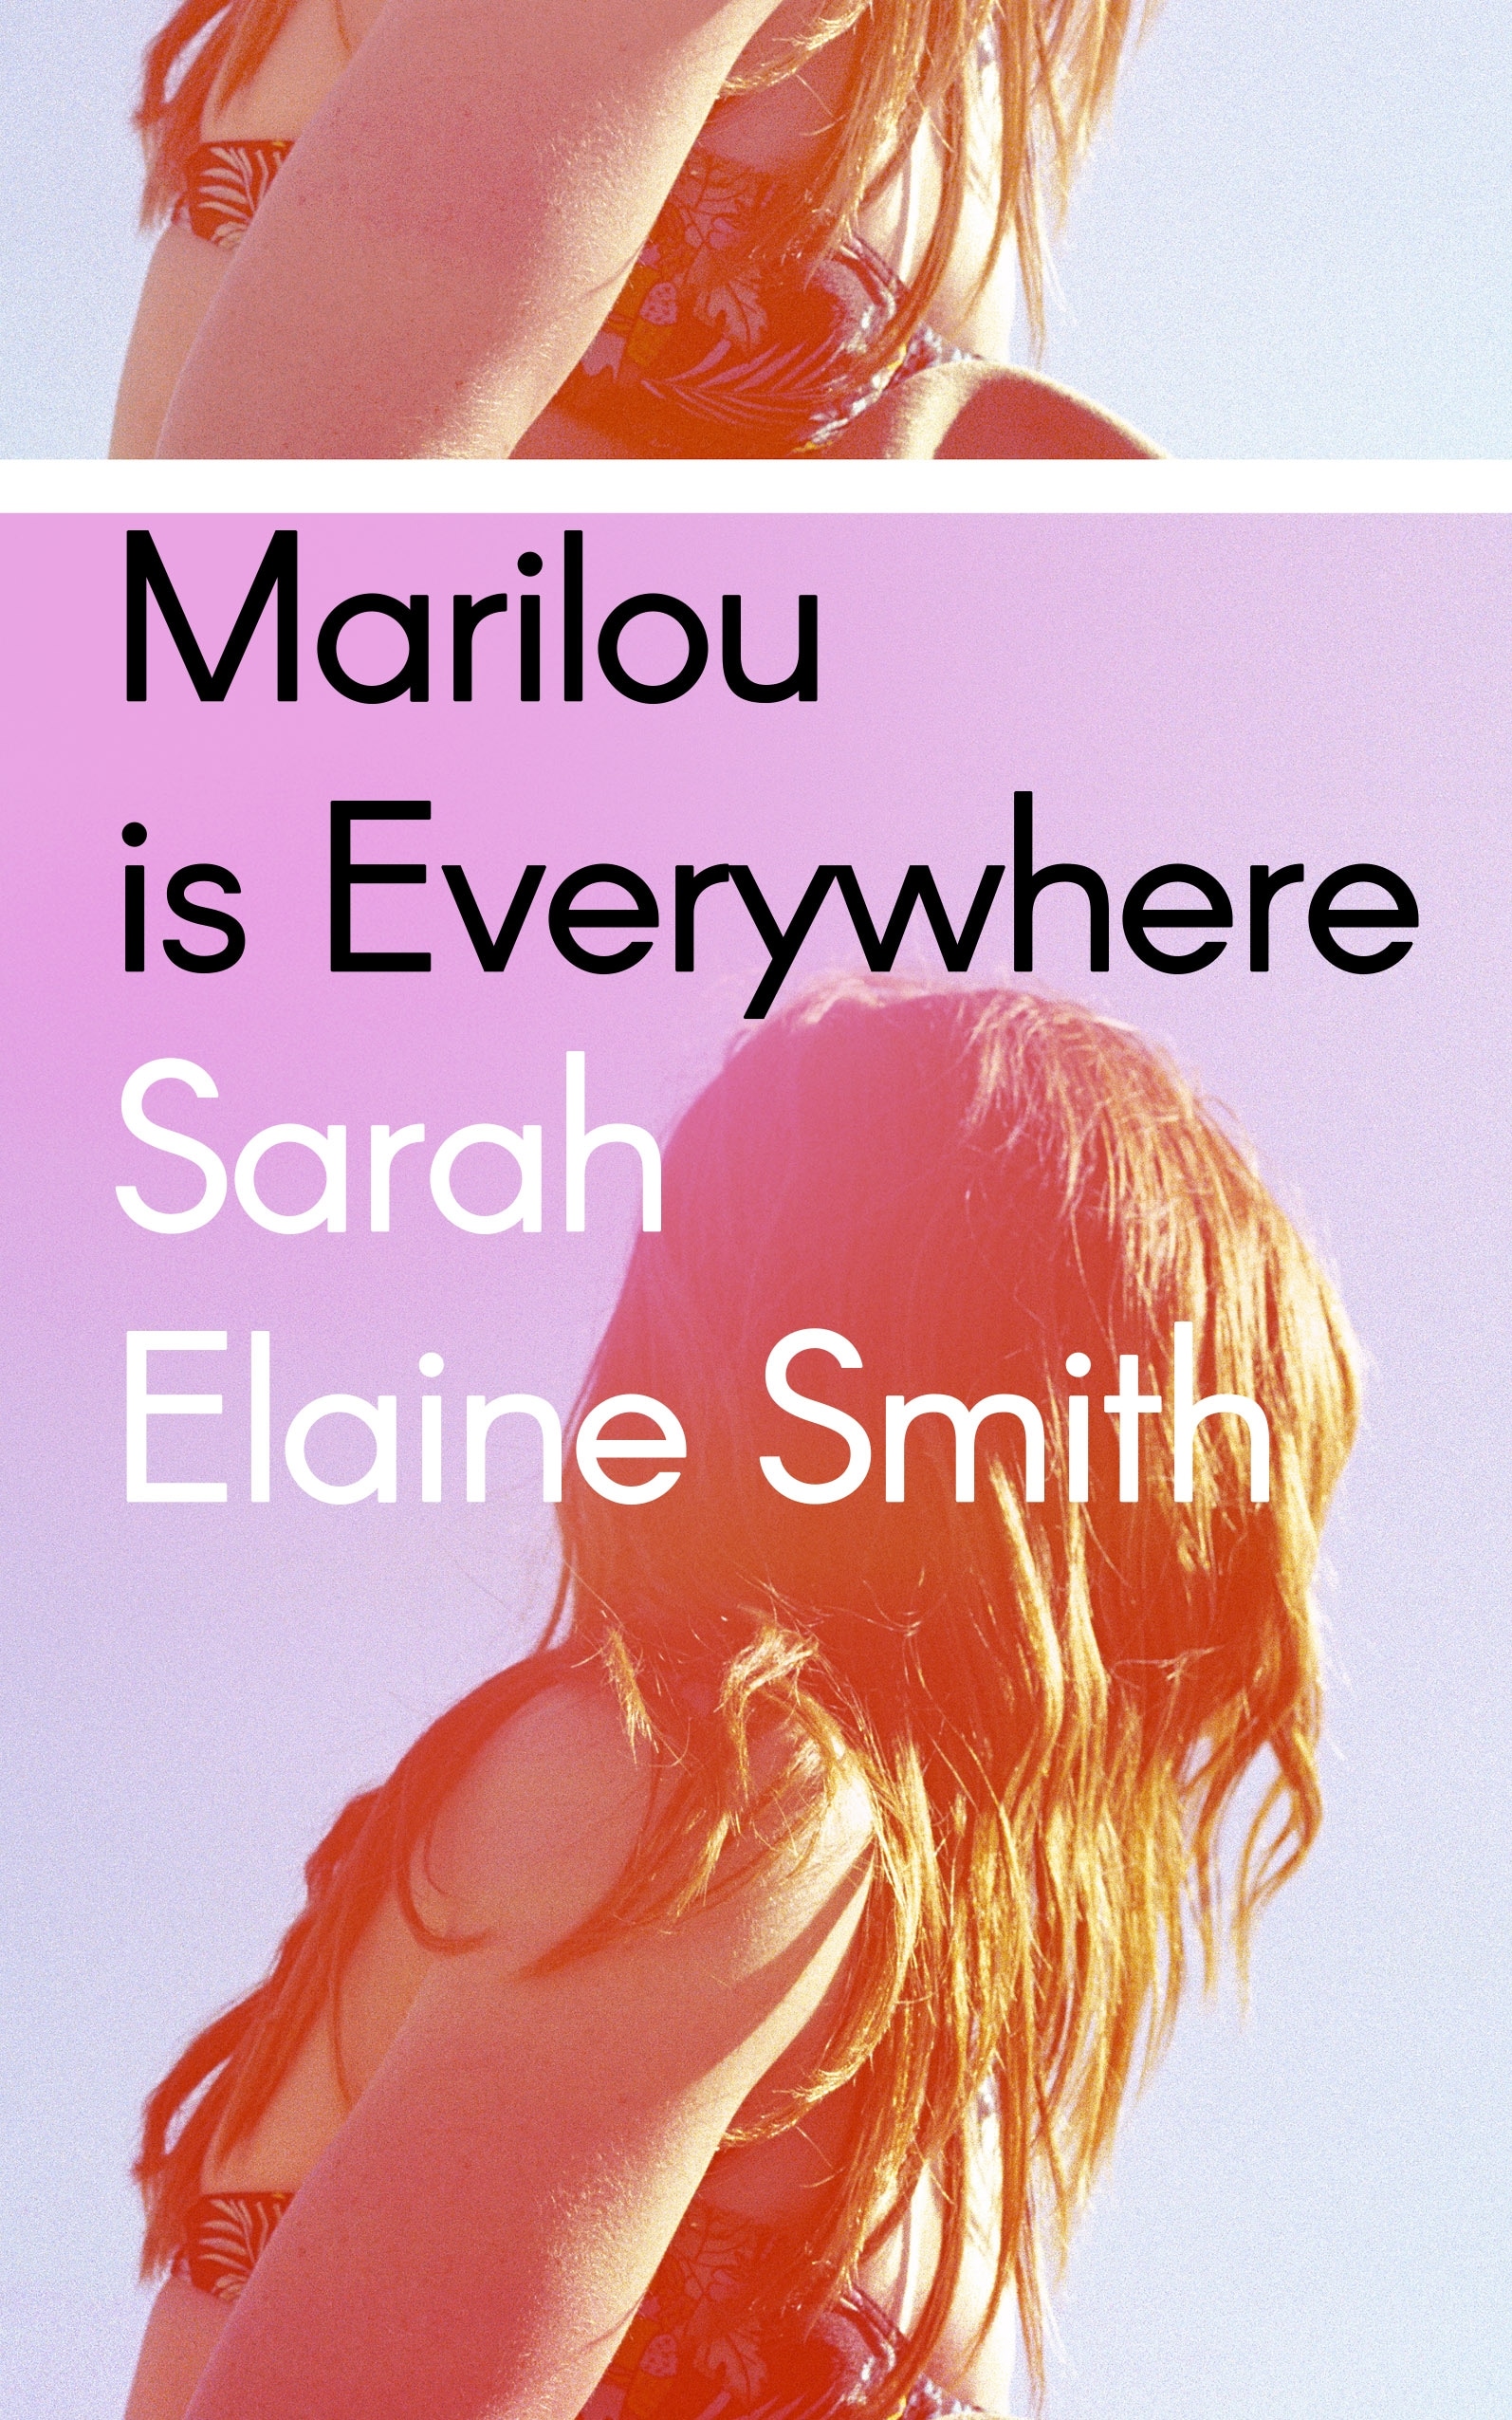 Book “Marilou is Everywhere” by Sarah Elaine Smith — March 26, 2020